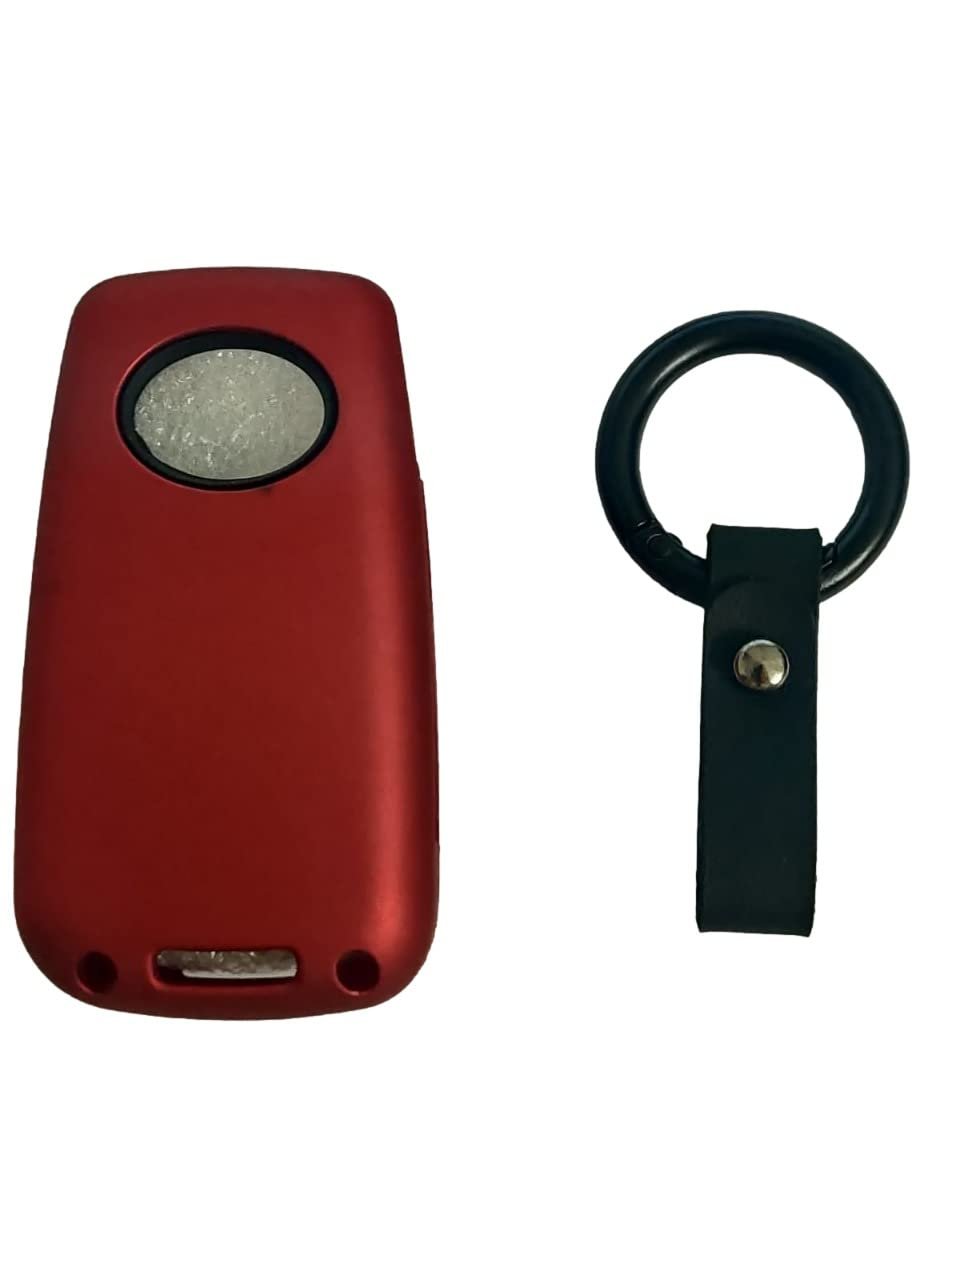 Red Fiber Style Car Key Cover Compatible with Toyota Corolla Altis Innova Crysta 3 Button Flip Key Cover (Red)